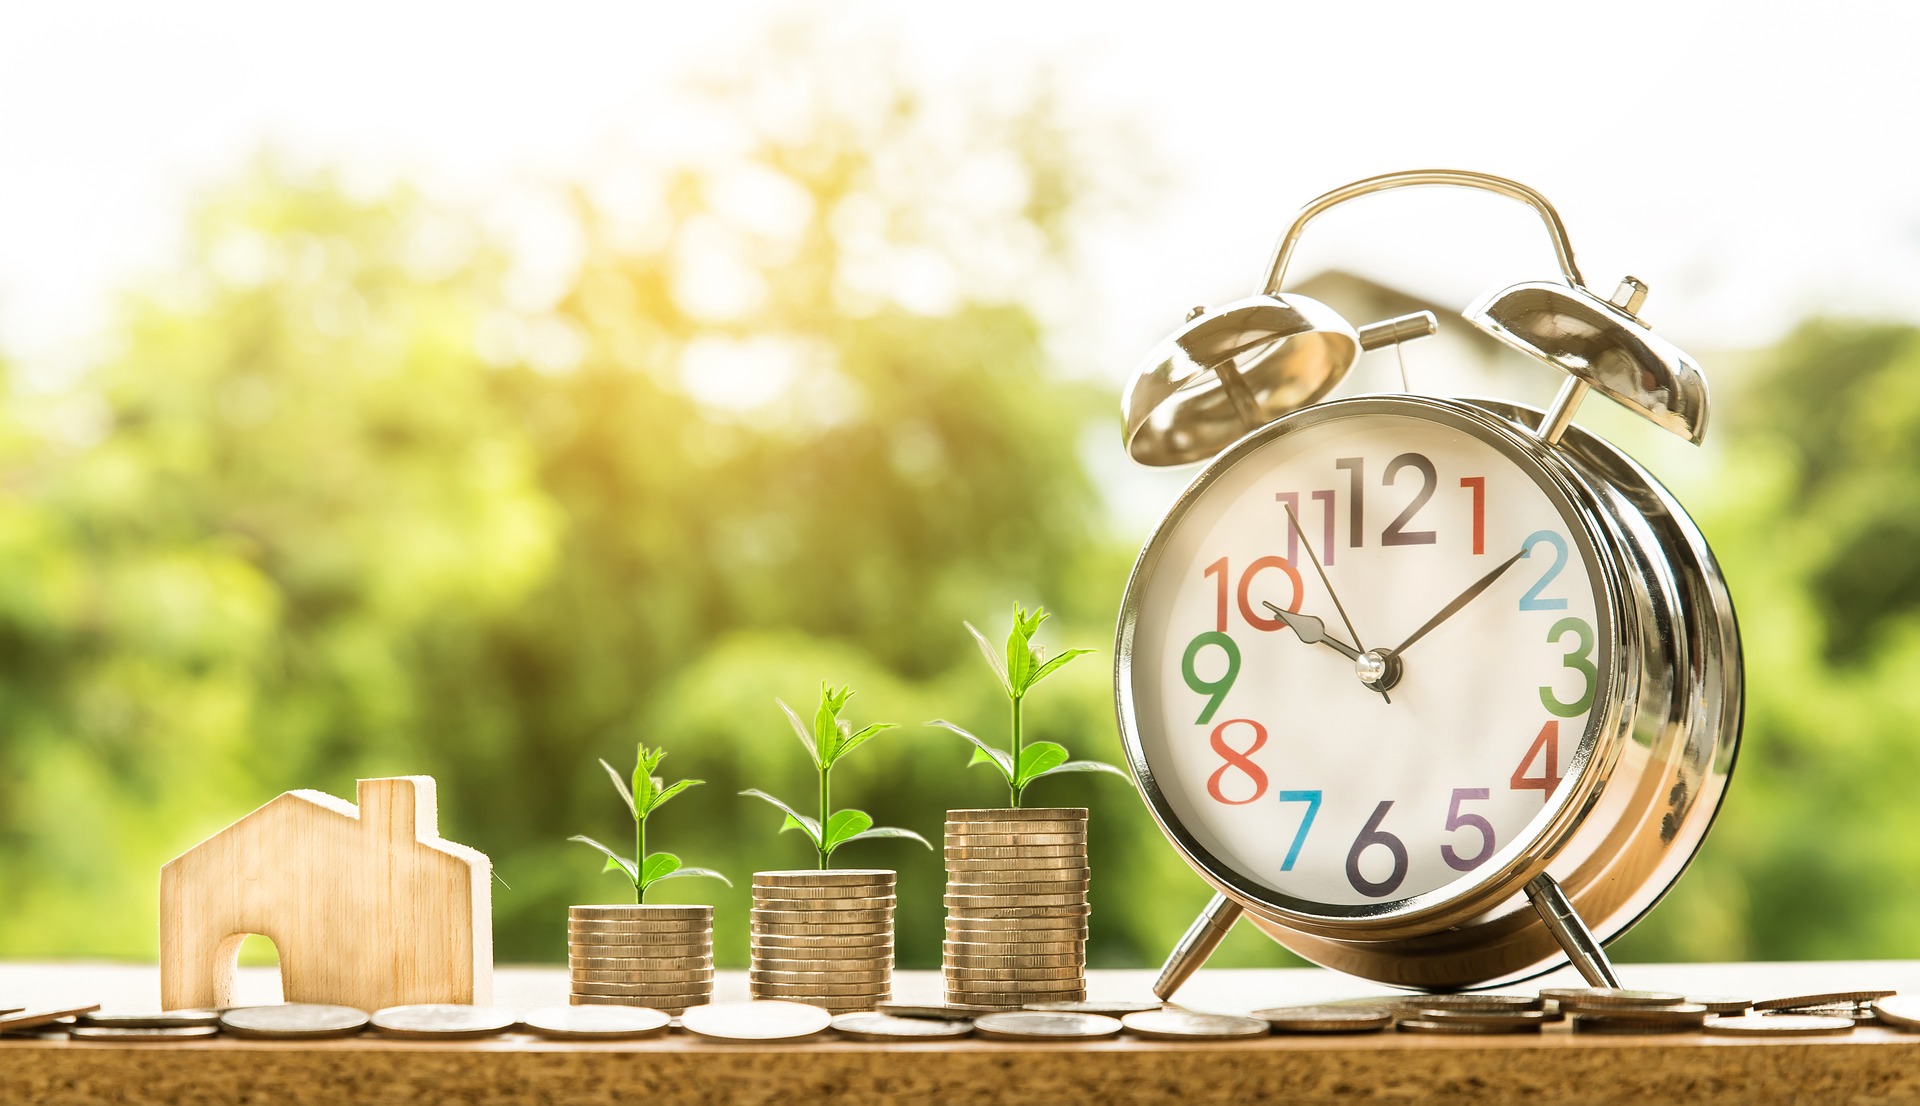 Time + money = a better financial future (Image Credit: Pixabay)